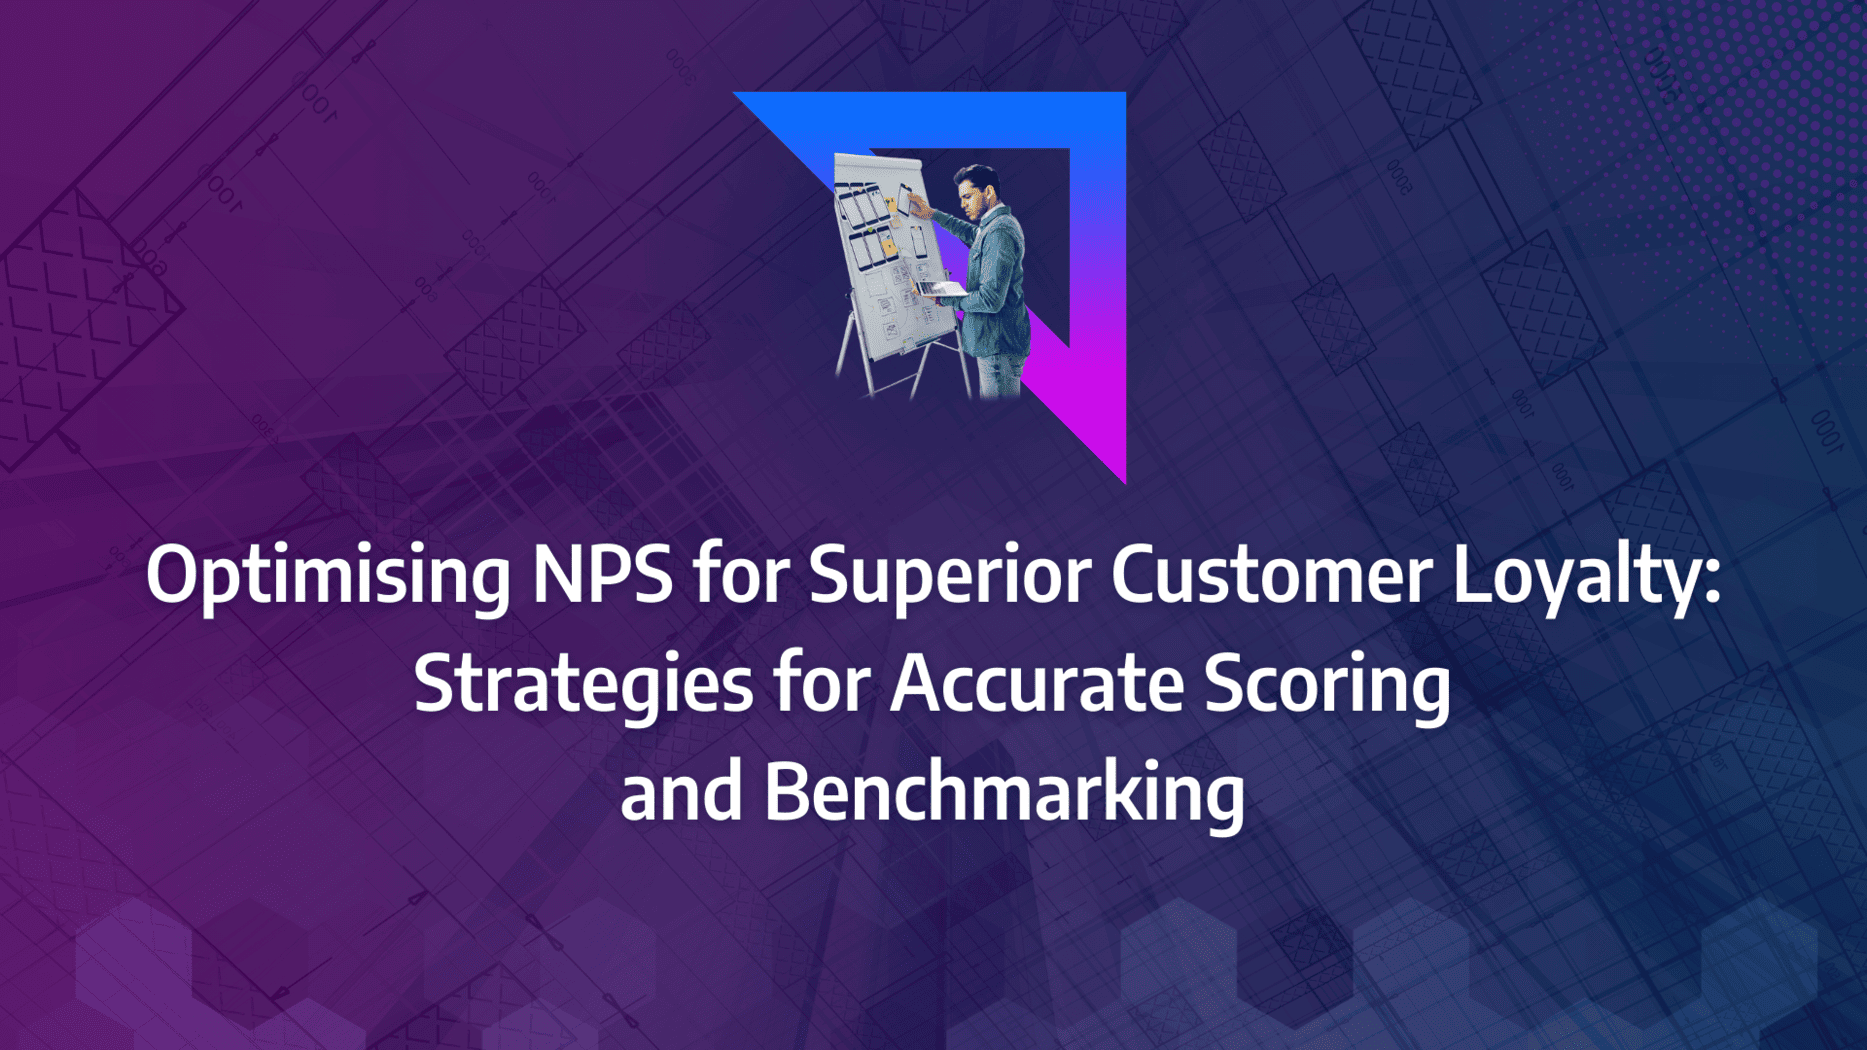 NPS: maximised through accurate score calculation, comprehensive survey implementation, effective formula application, and industry benchmarking for enhanced customer loyalty and satisfaction.: strategy framework diagram for nps score, nps survey, nps formula, nps benchmark